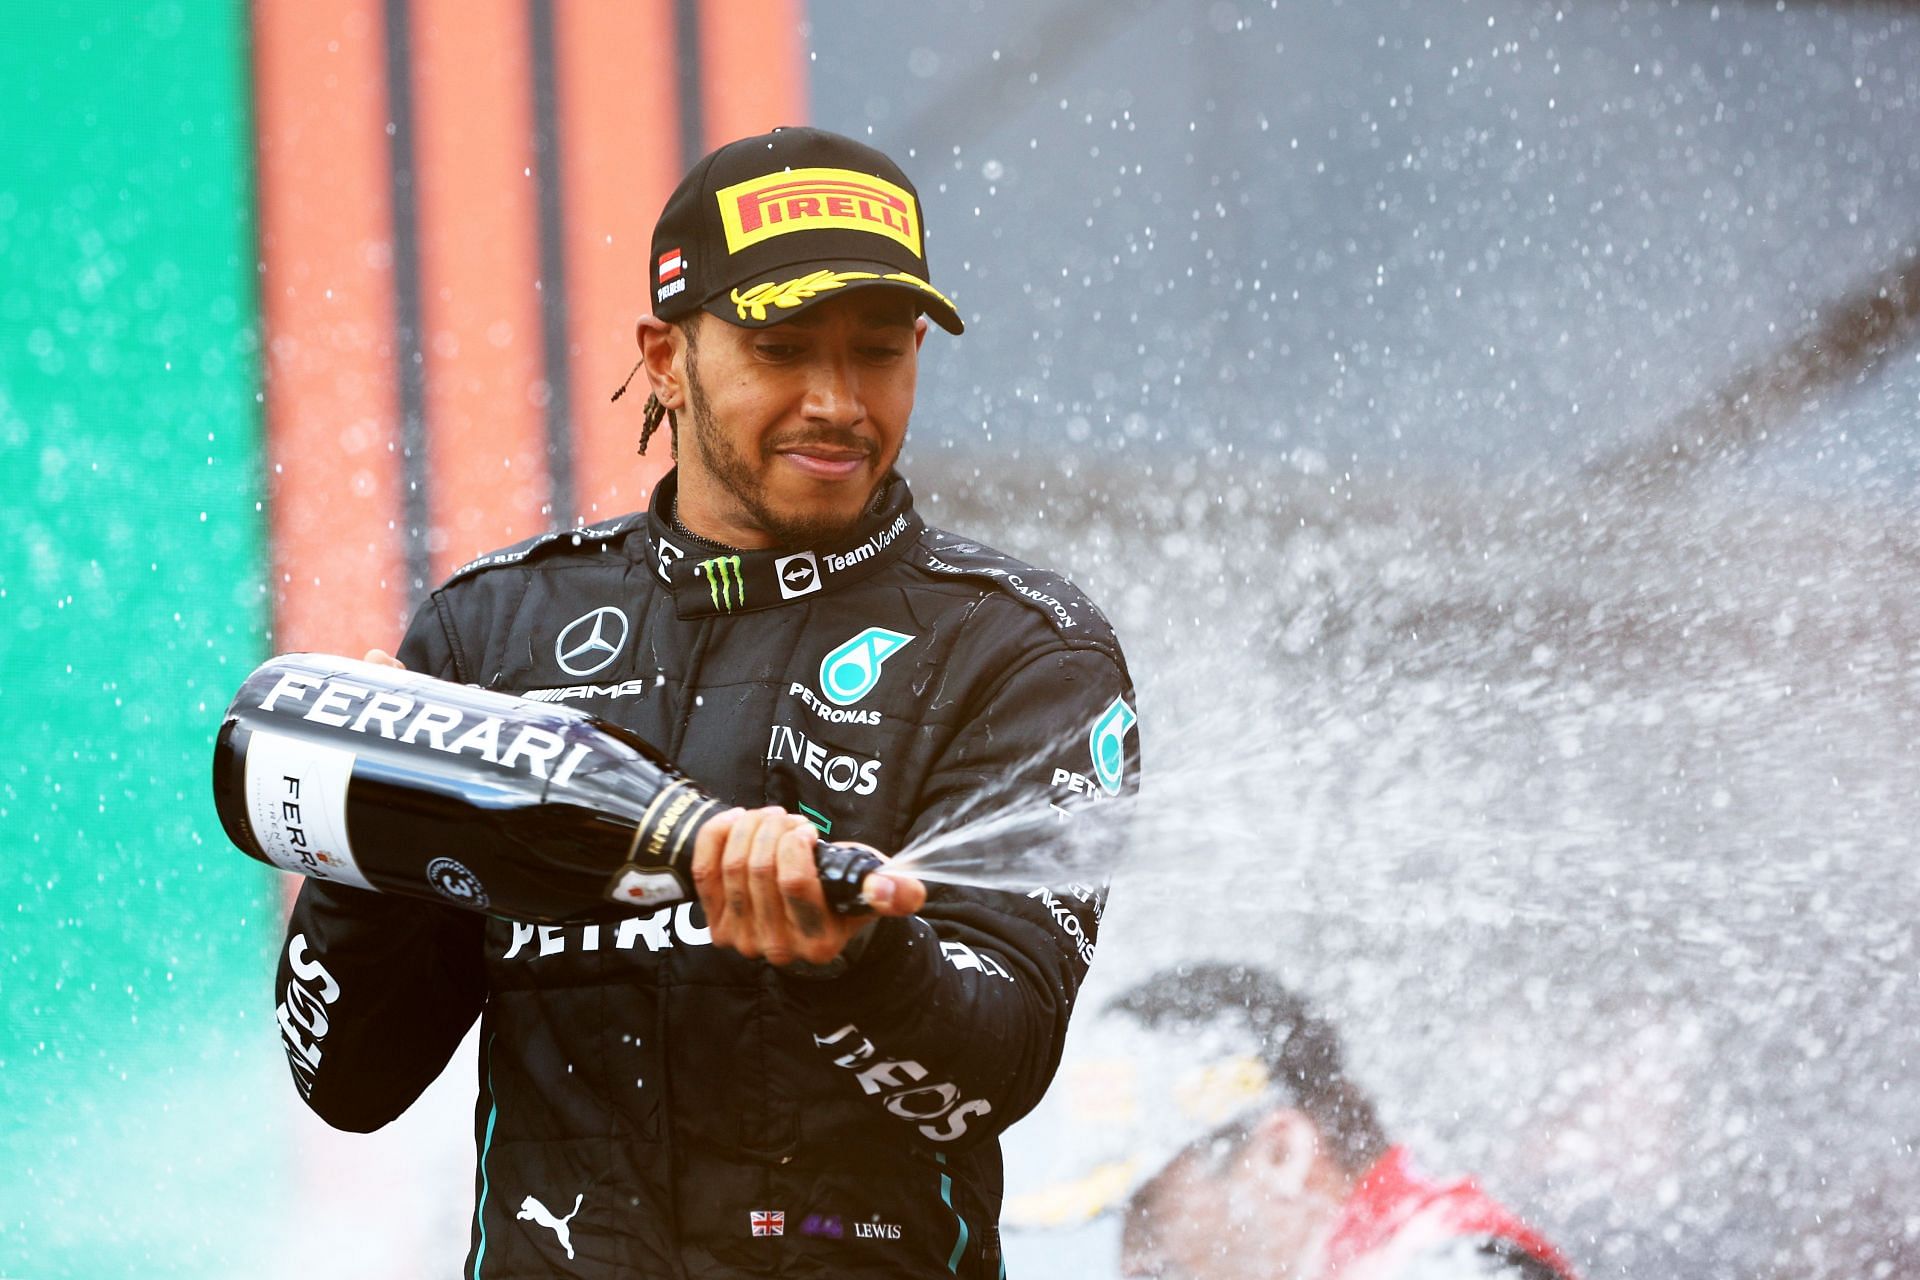 Hamilton should be an eight-time world champion according to Toto Wolff.